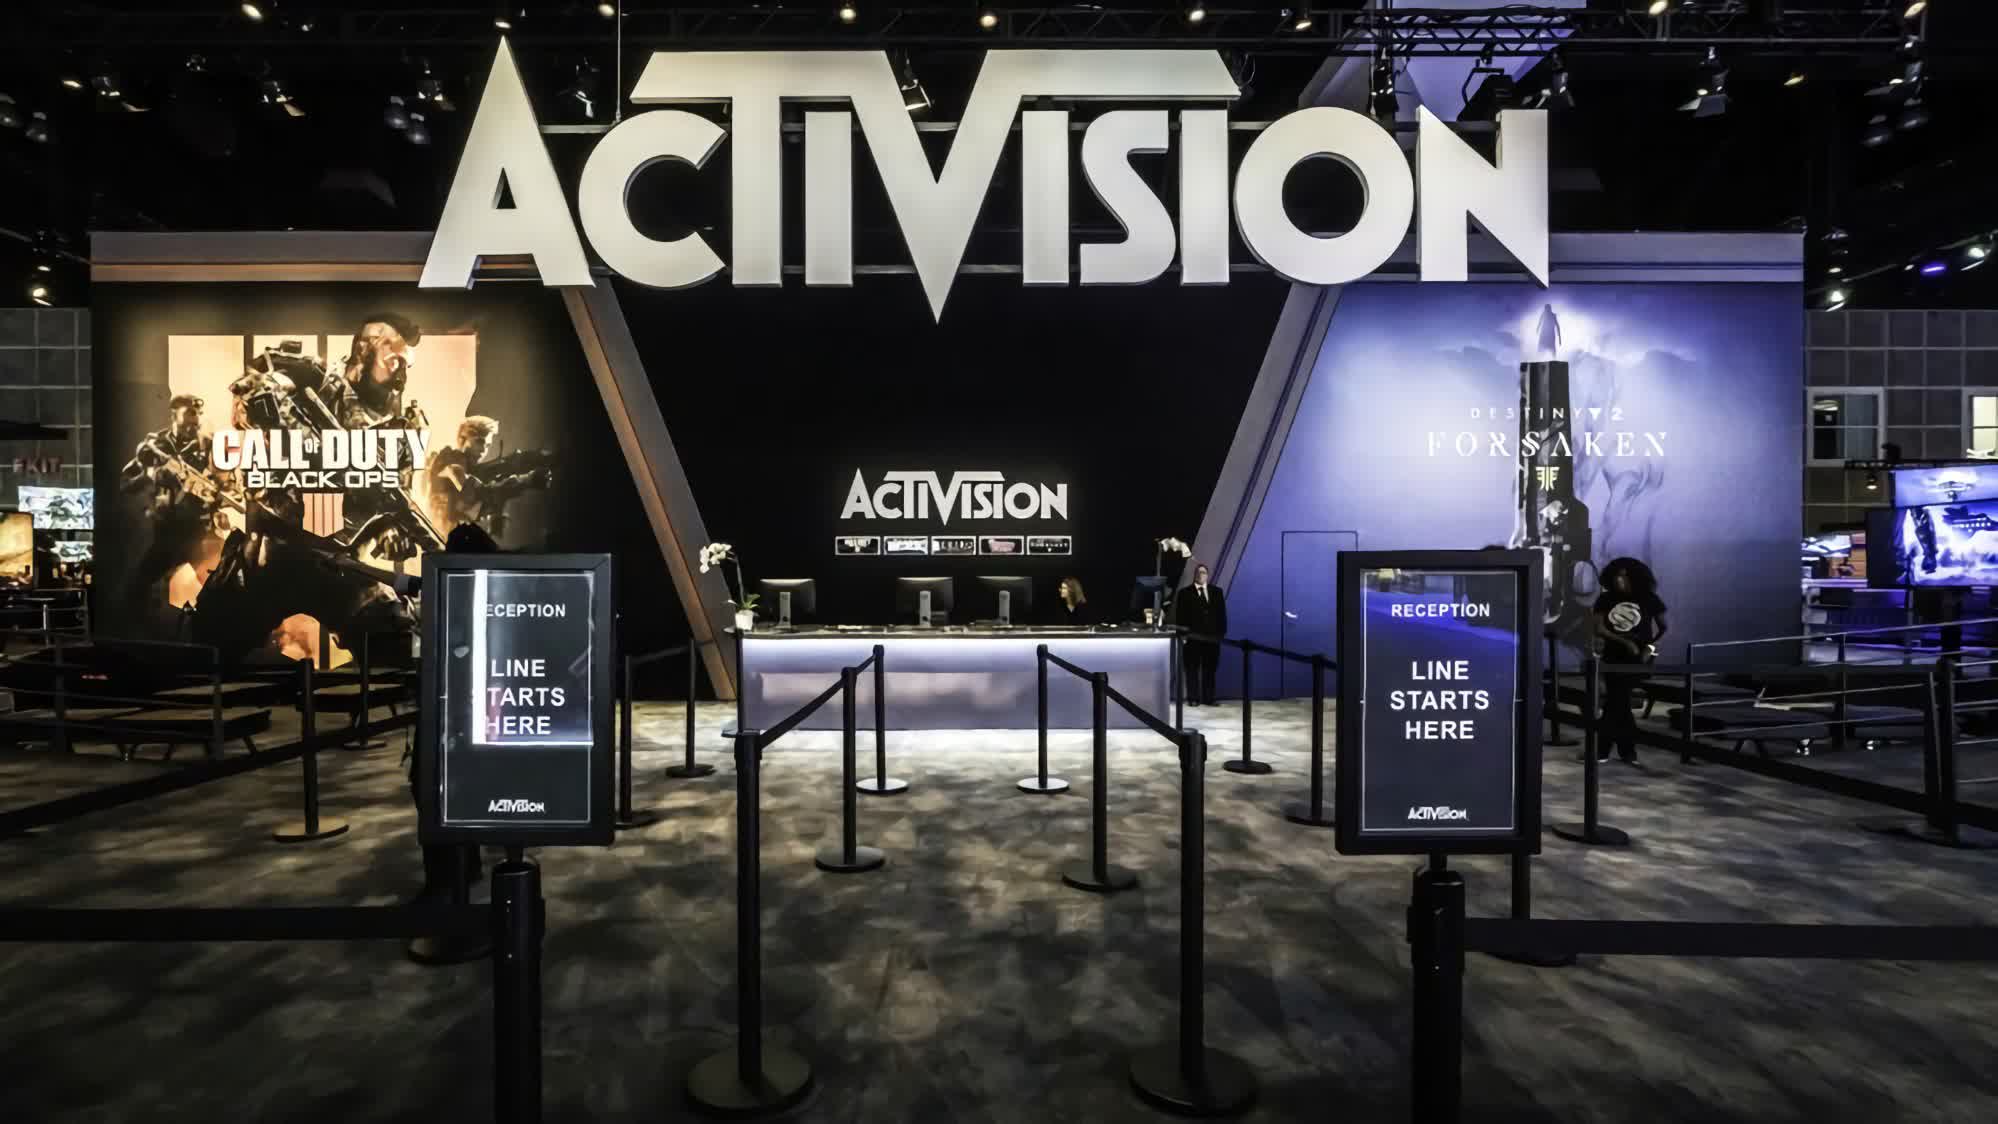 Microsoft acquisition of Activision Blizzard is finally happening